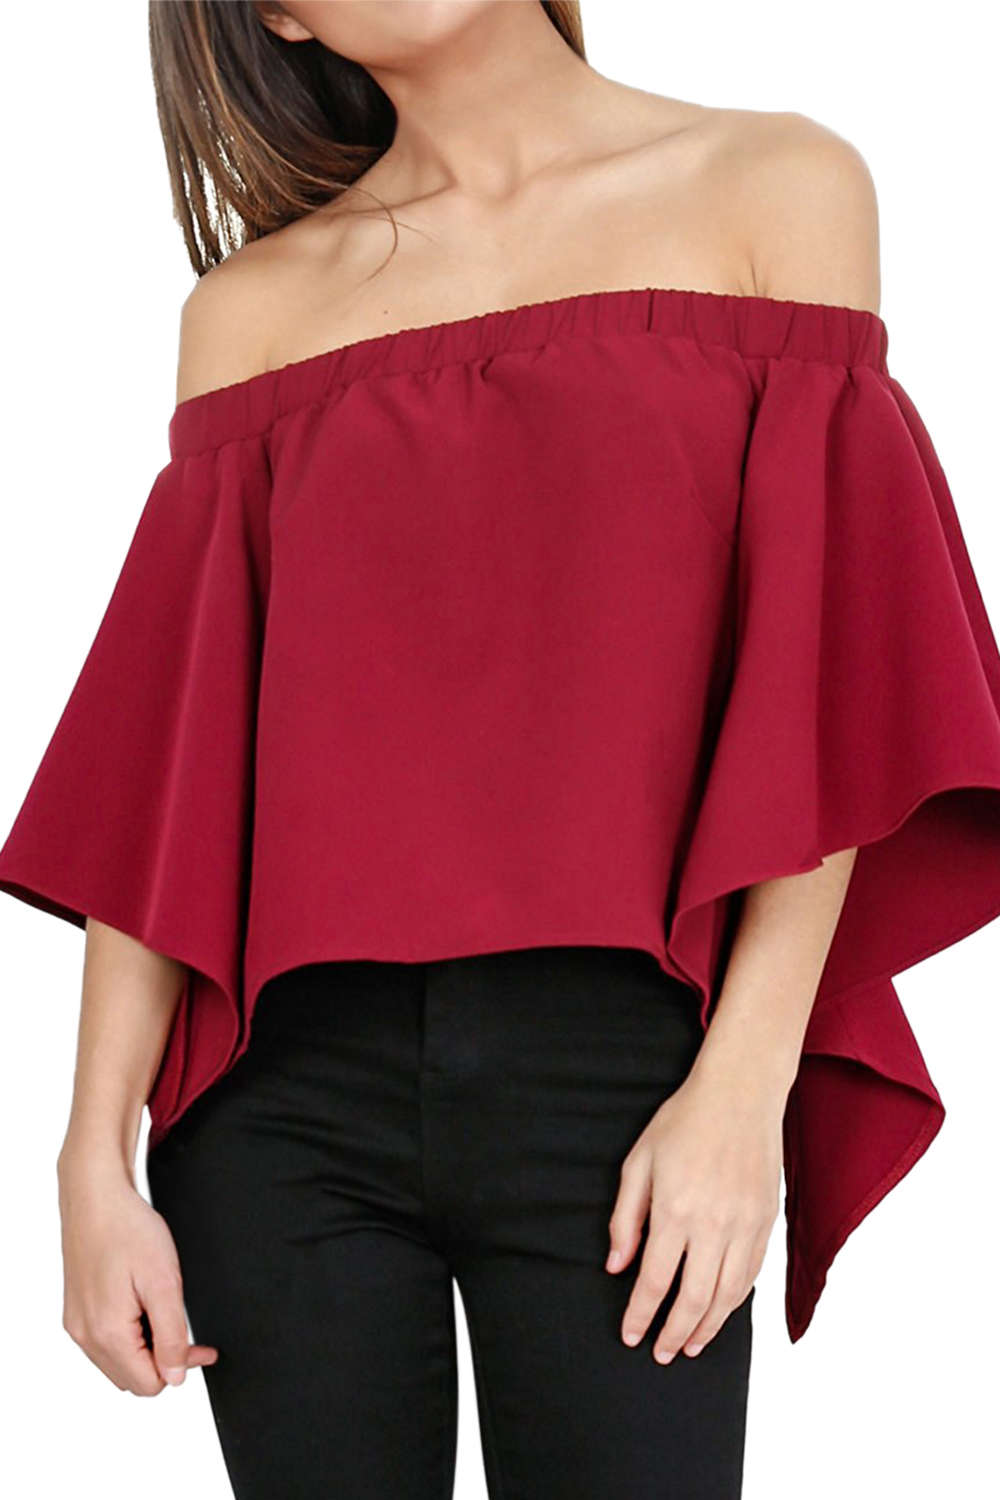 Iyasson Women's Off Shoulder Casual Strapless Blouses